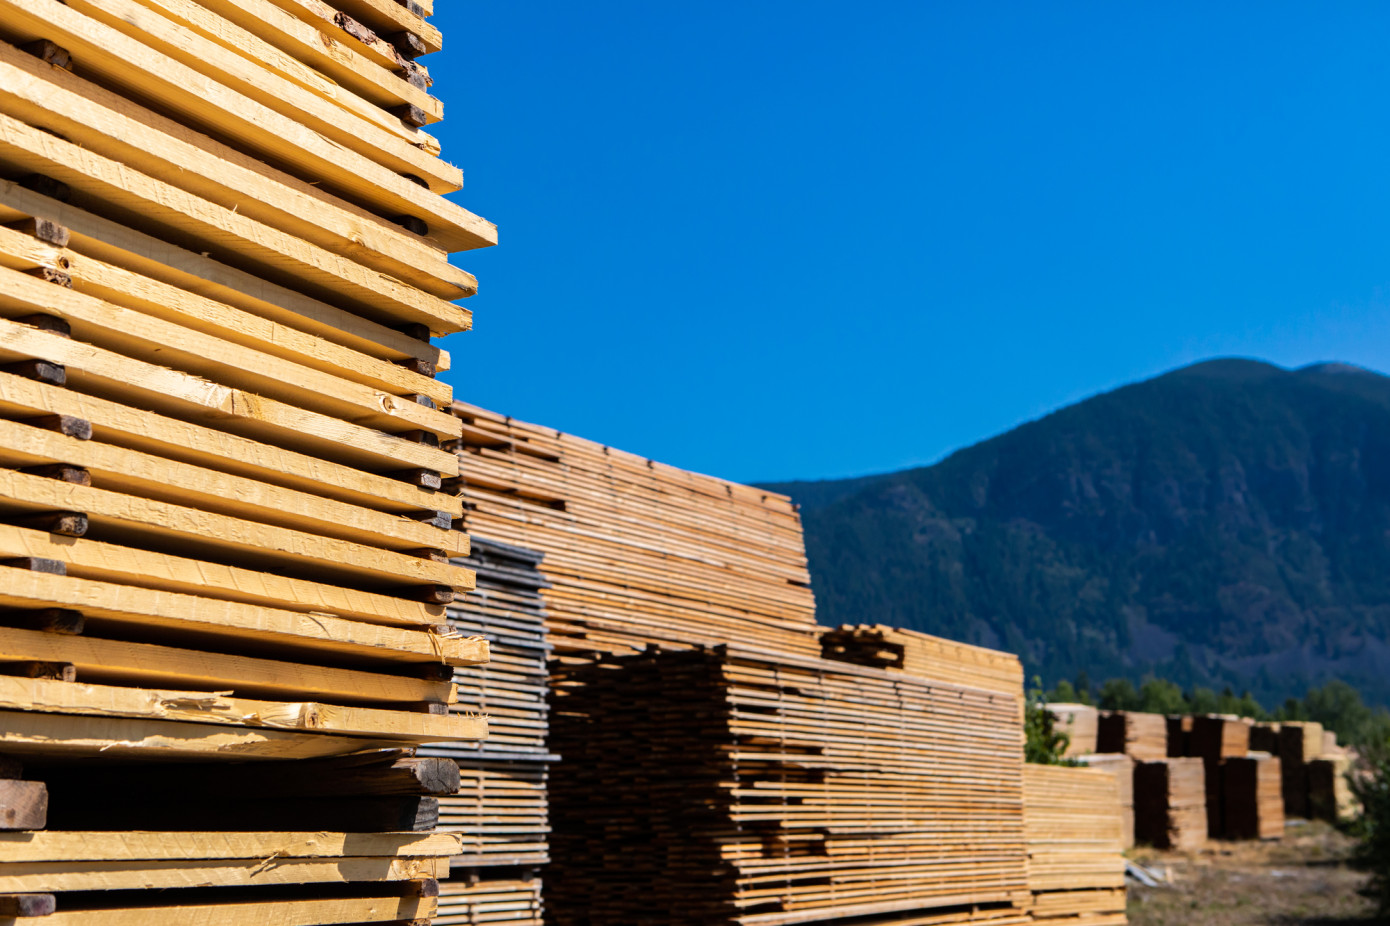 Canadian wood products sales up 8.5% in February